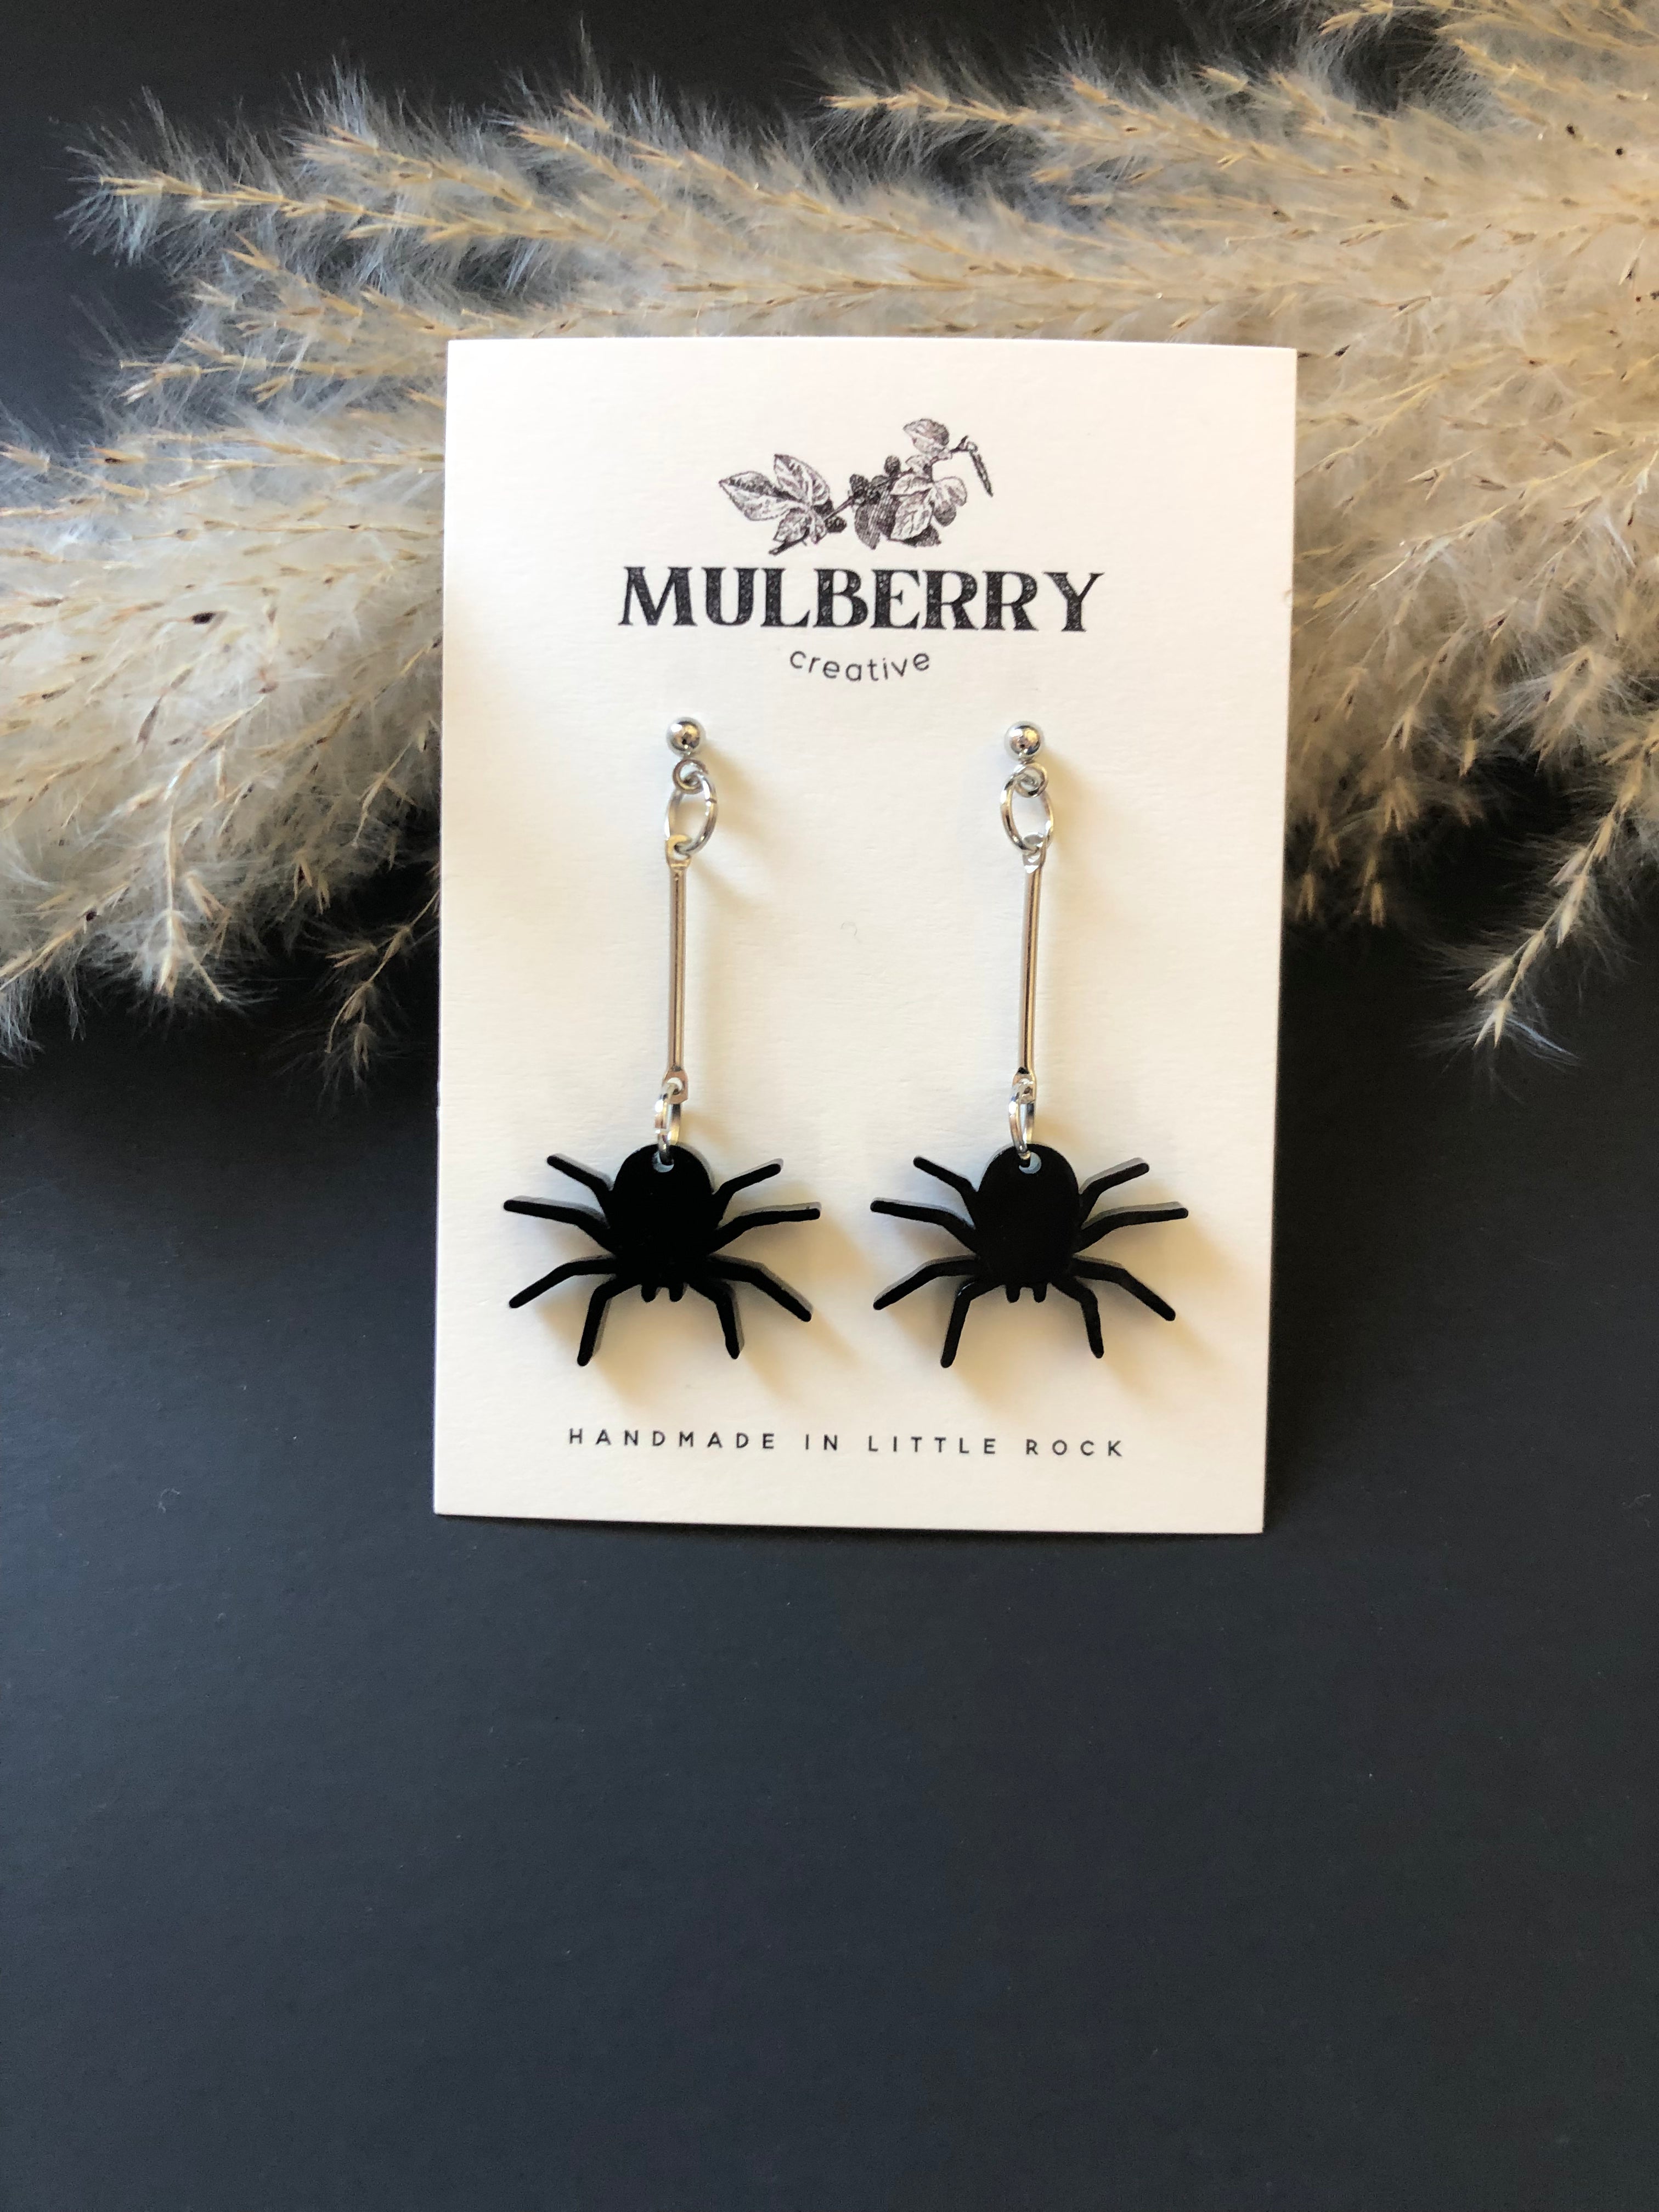 Itsy Bitsy Spider Earrings